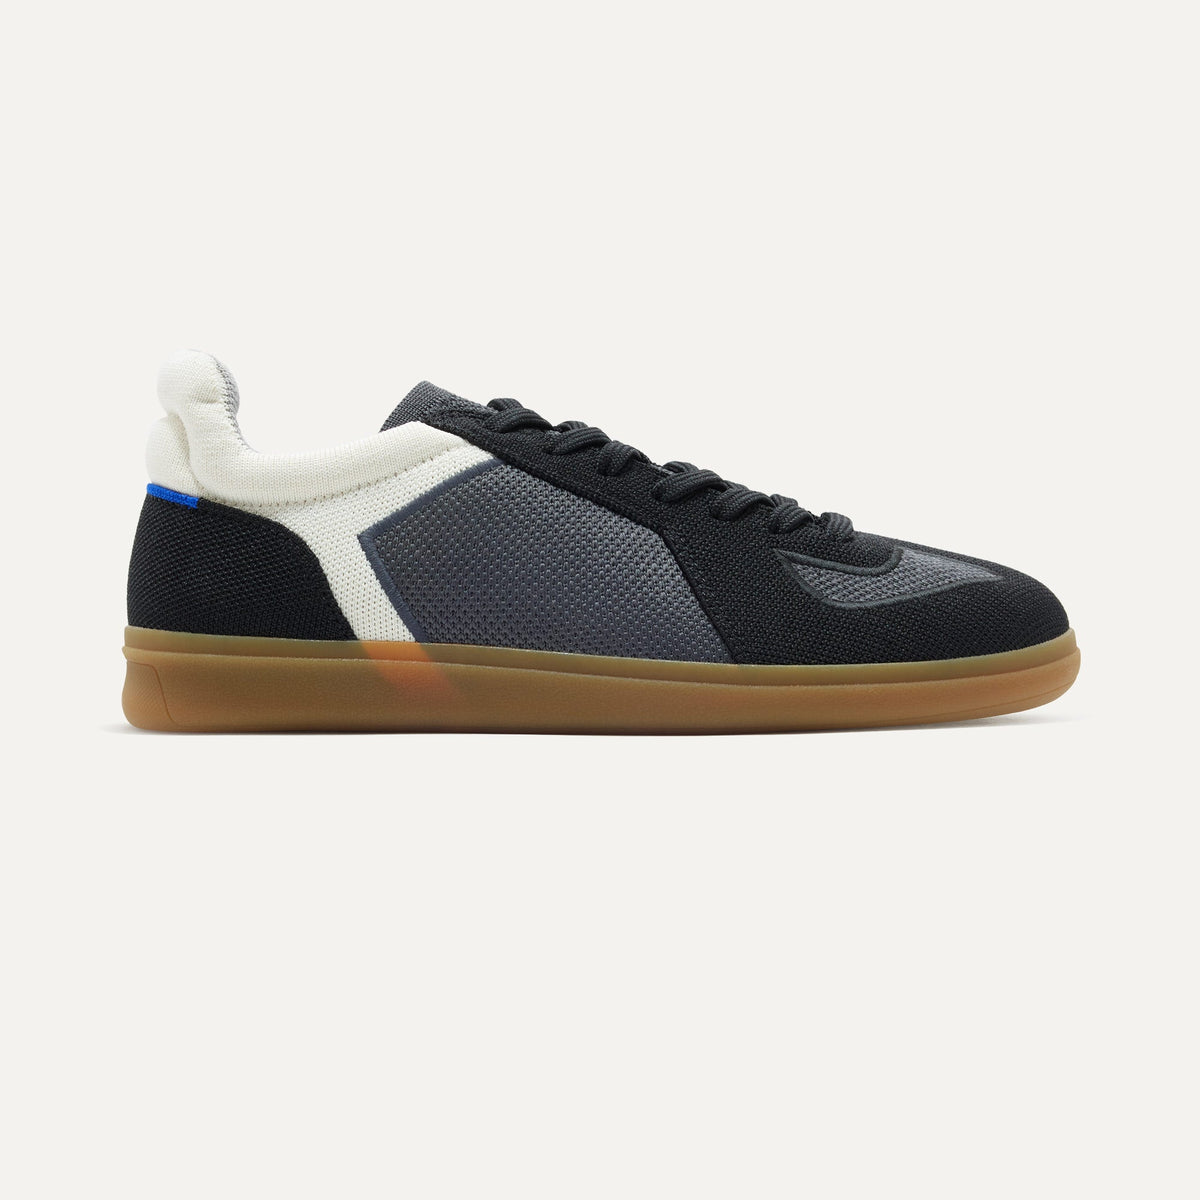 The RS01 Sneaker in Obsidian Black | Men’s Tennis Shoes | Rothy's